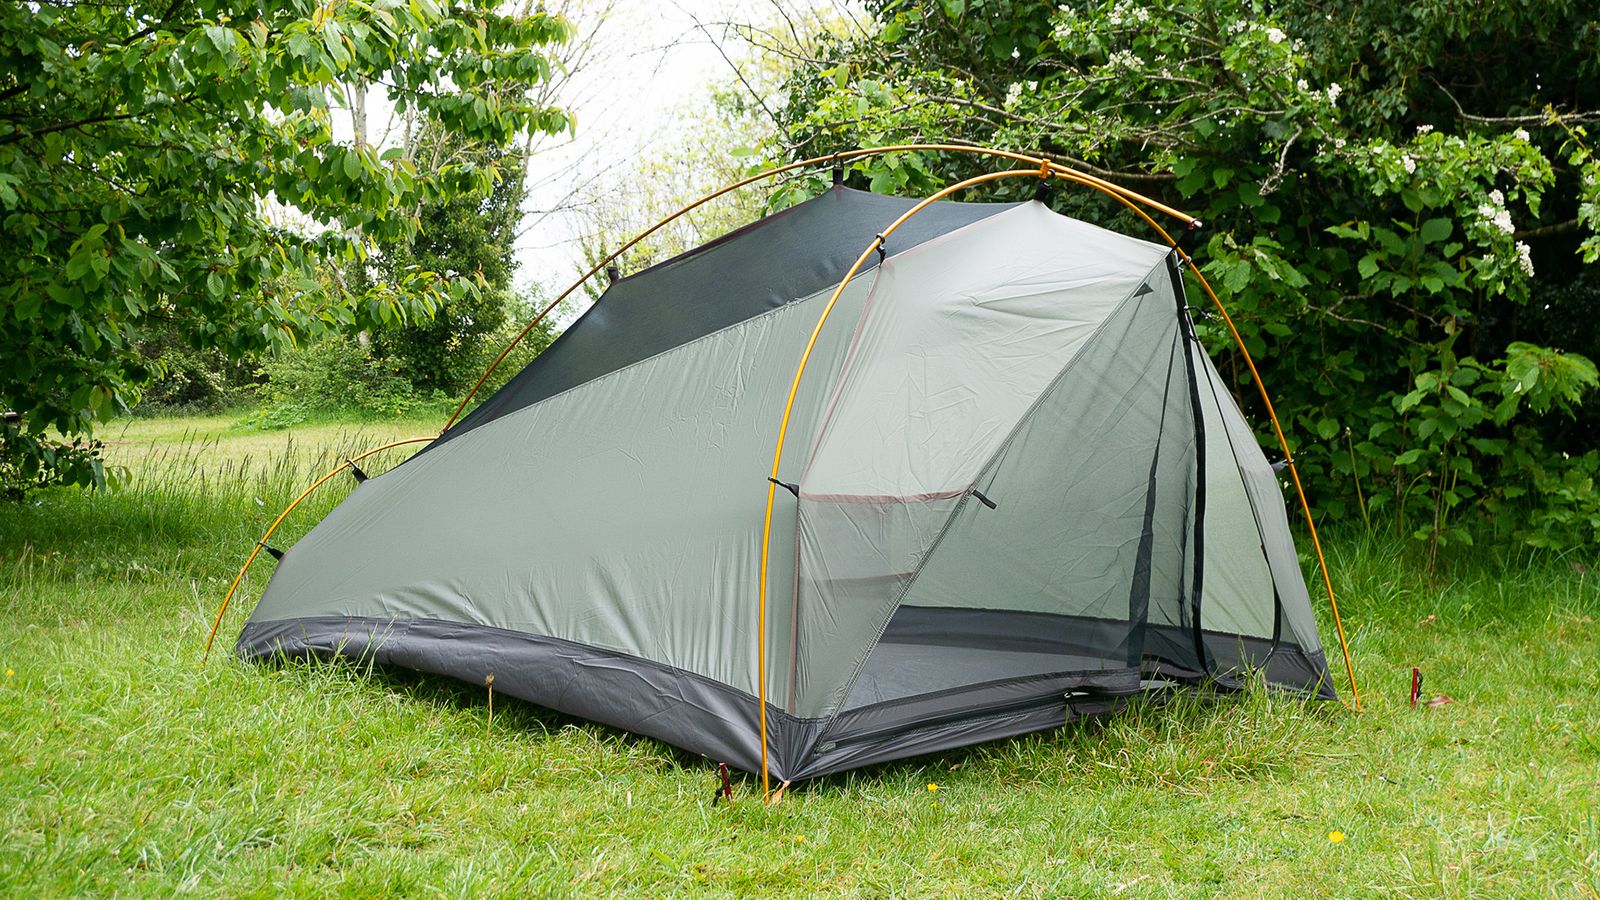 Alpkit Ordos 2 tent review: a lightweight and well-priced backpacking ...